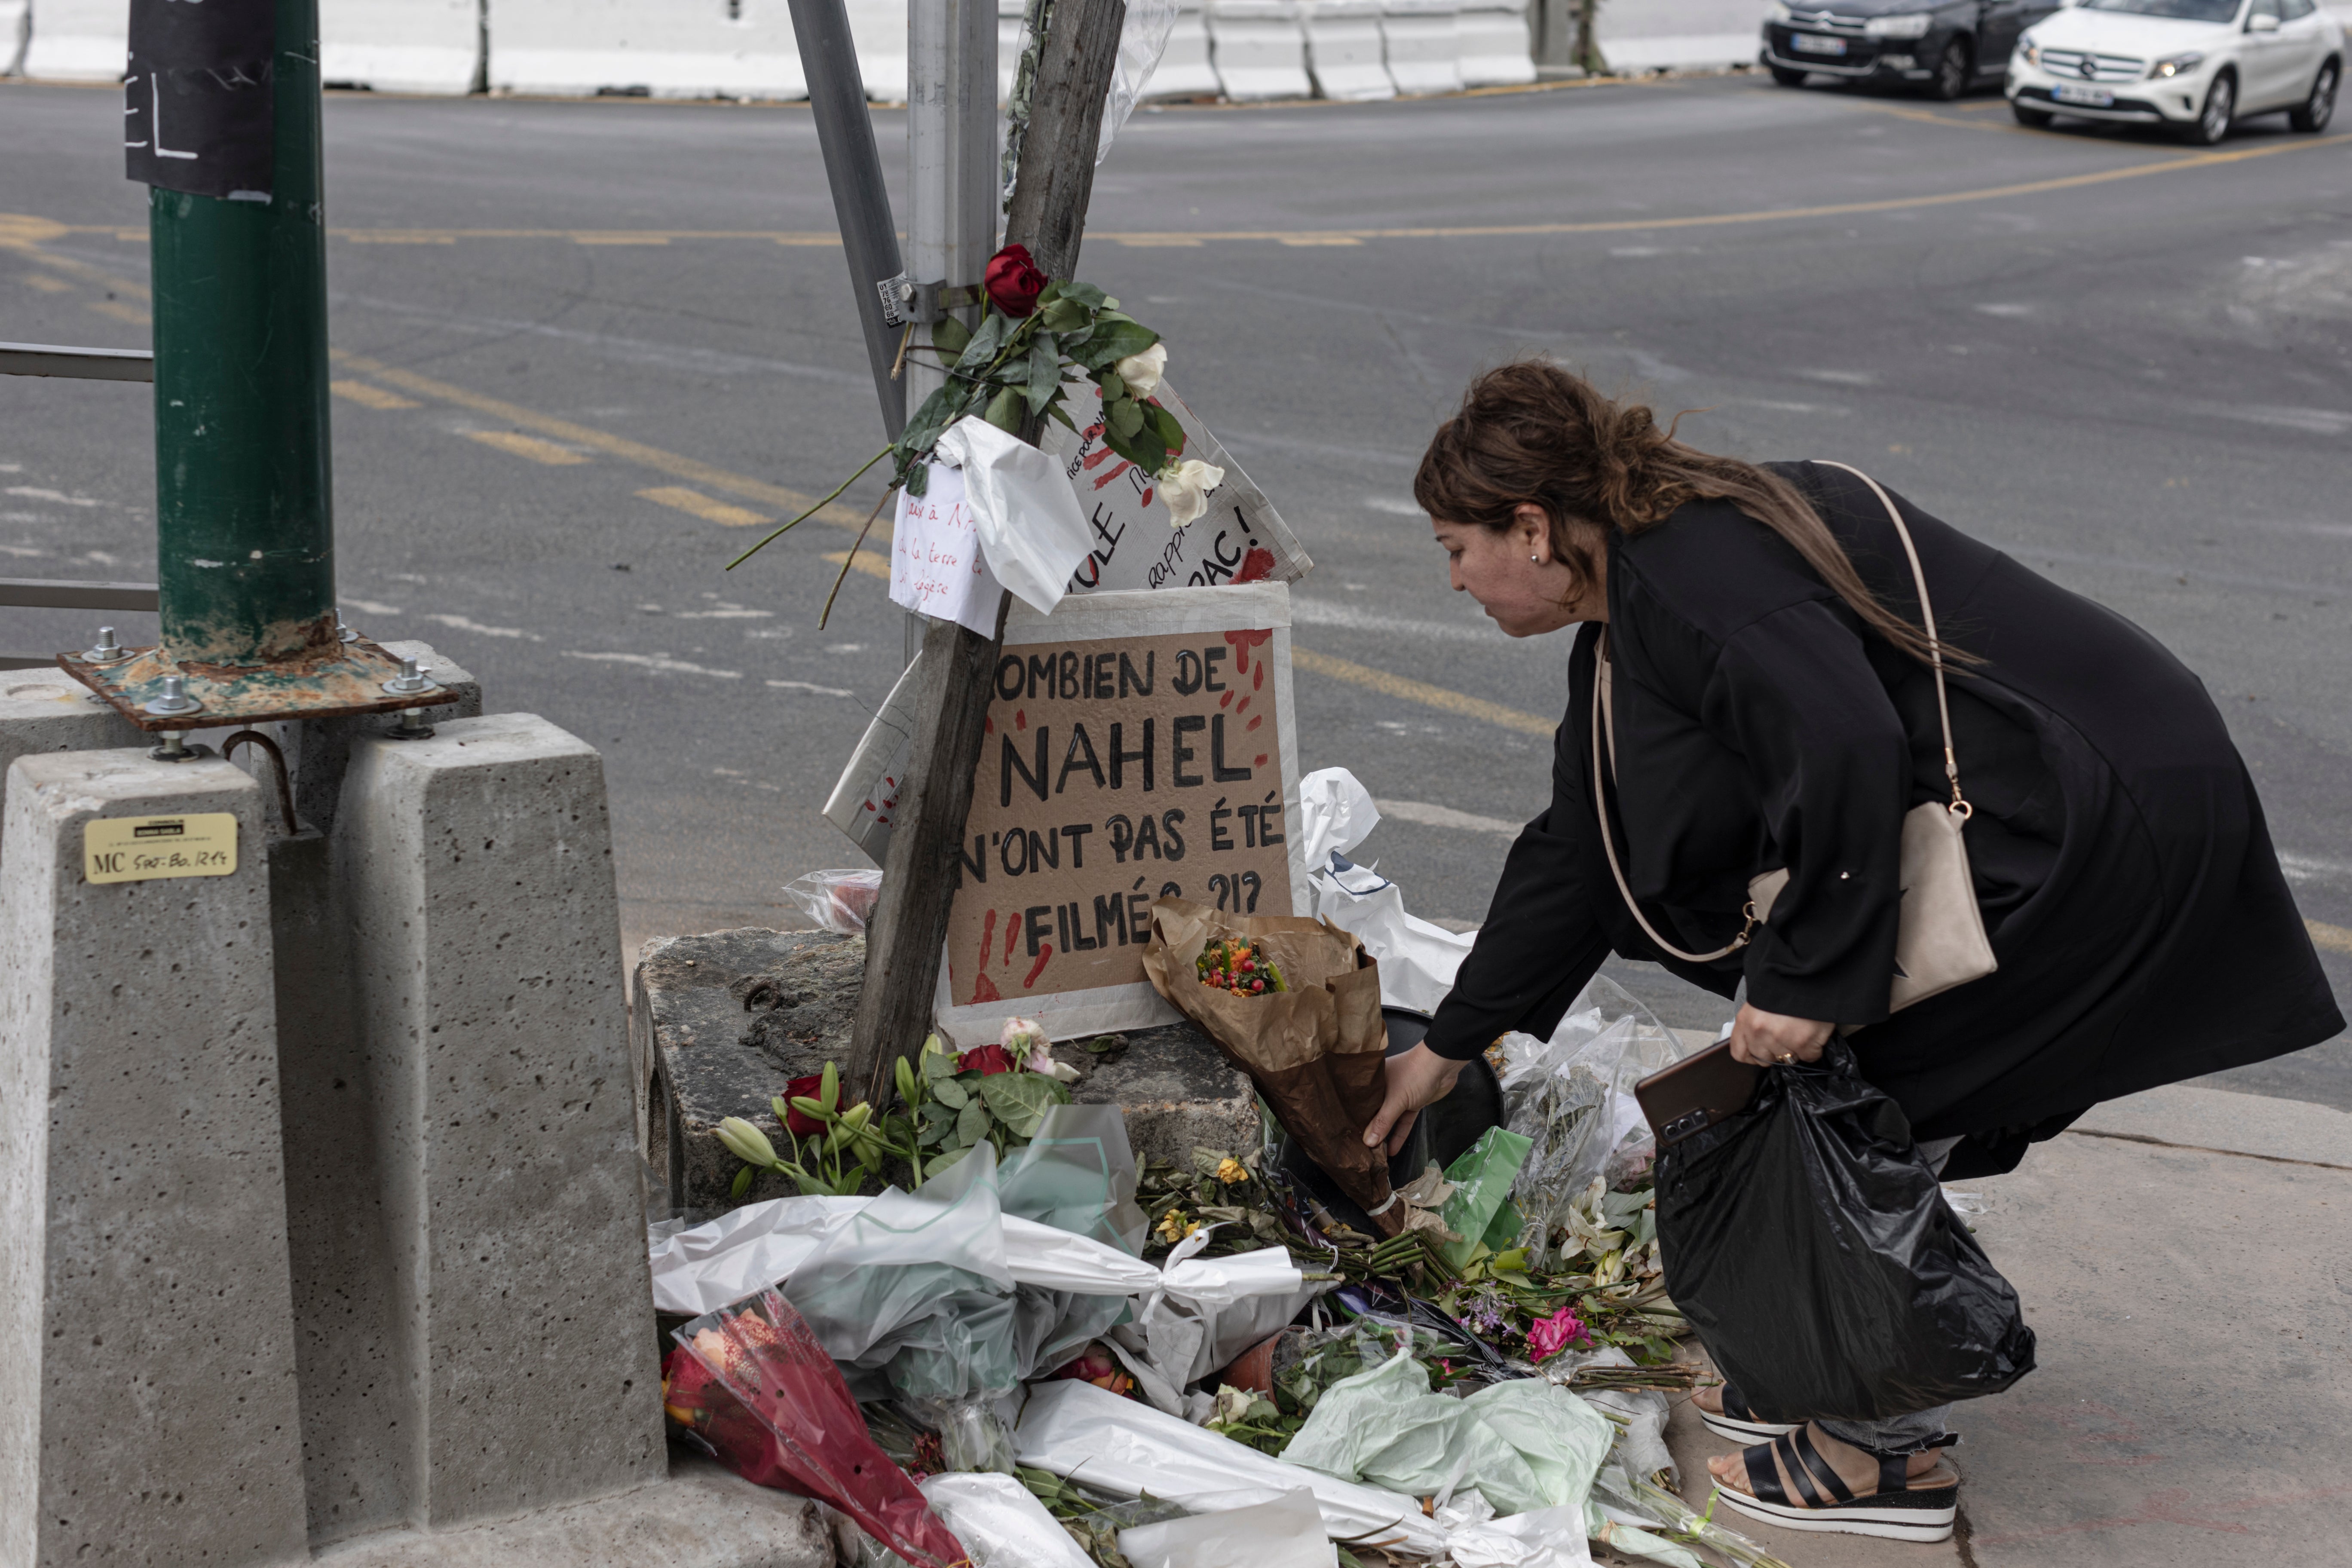 A woman pays her respects at the site where Nahel died in Nanterre